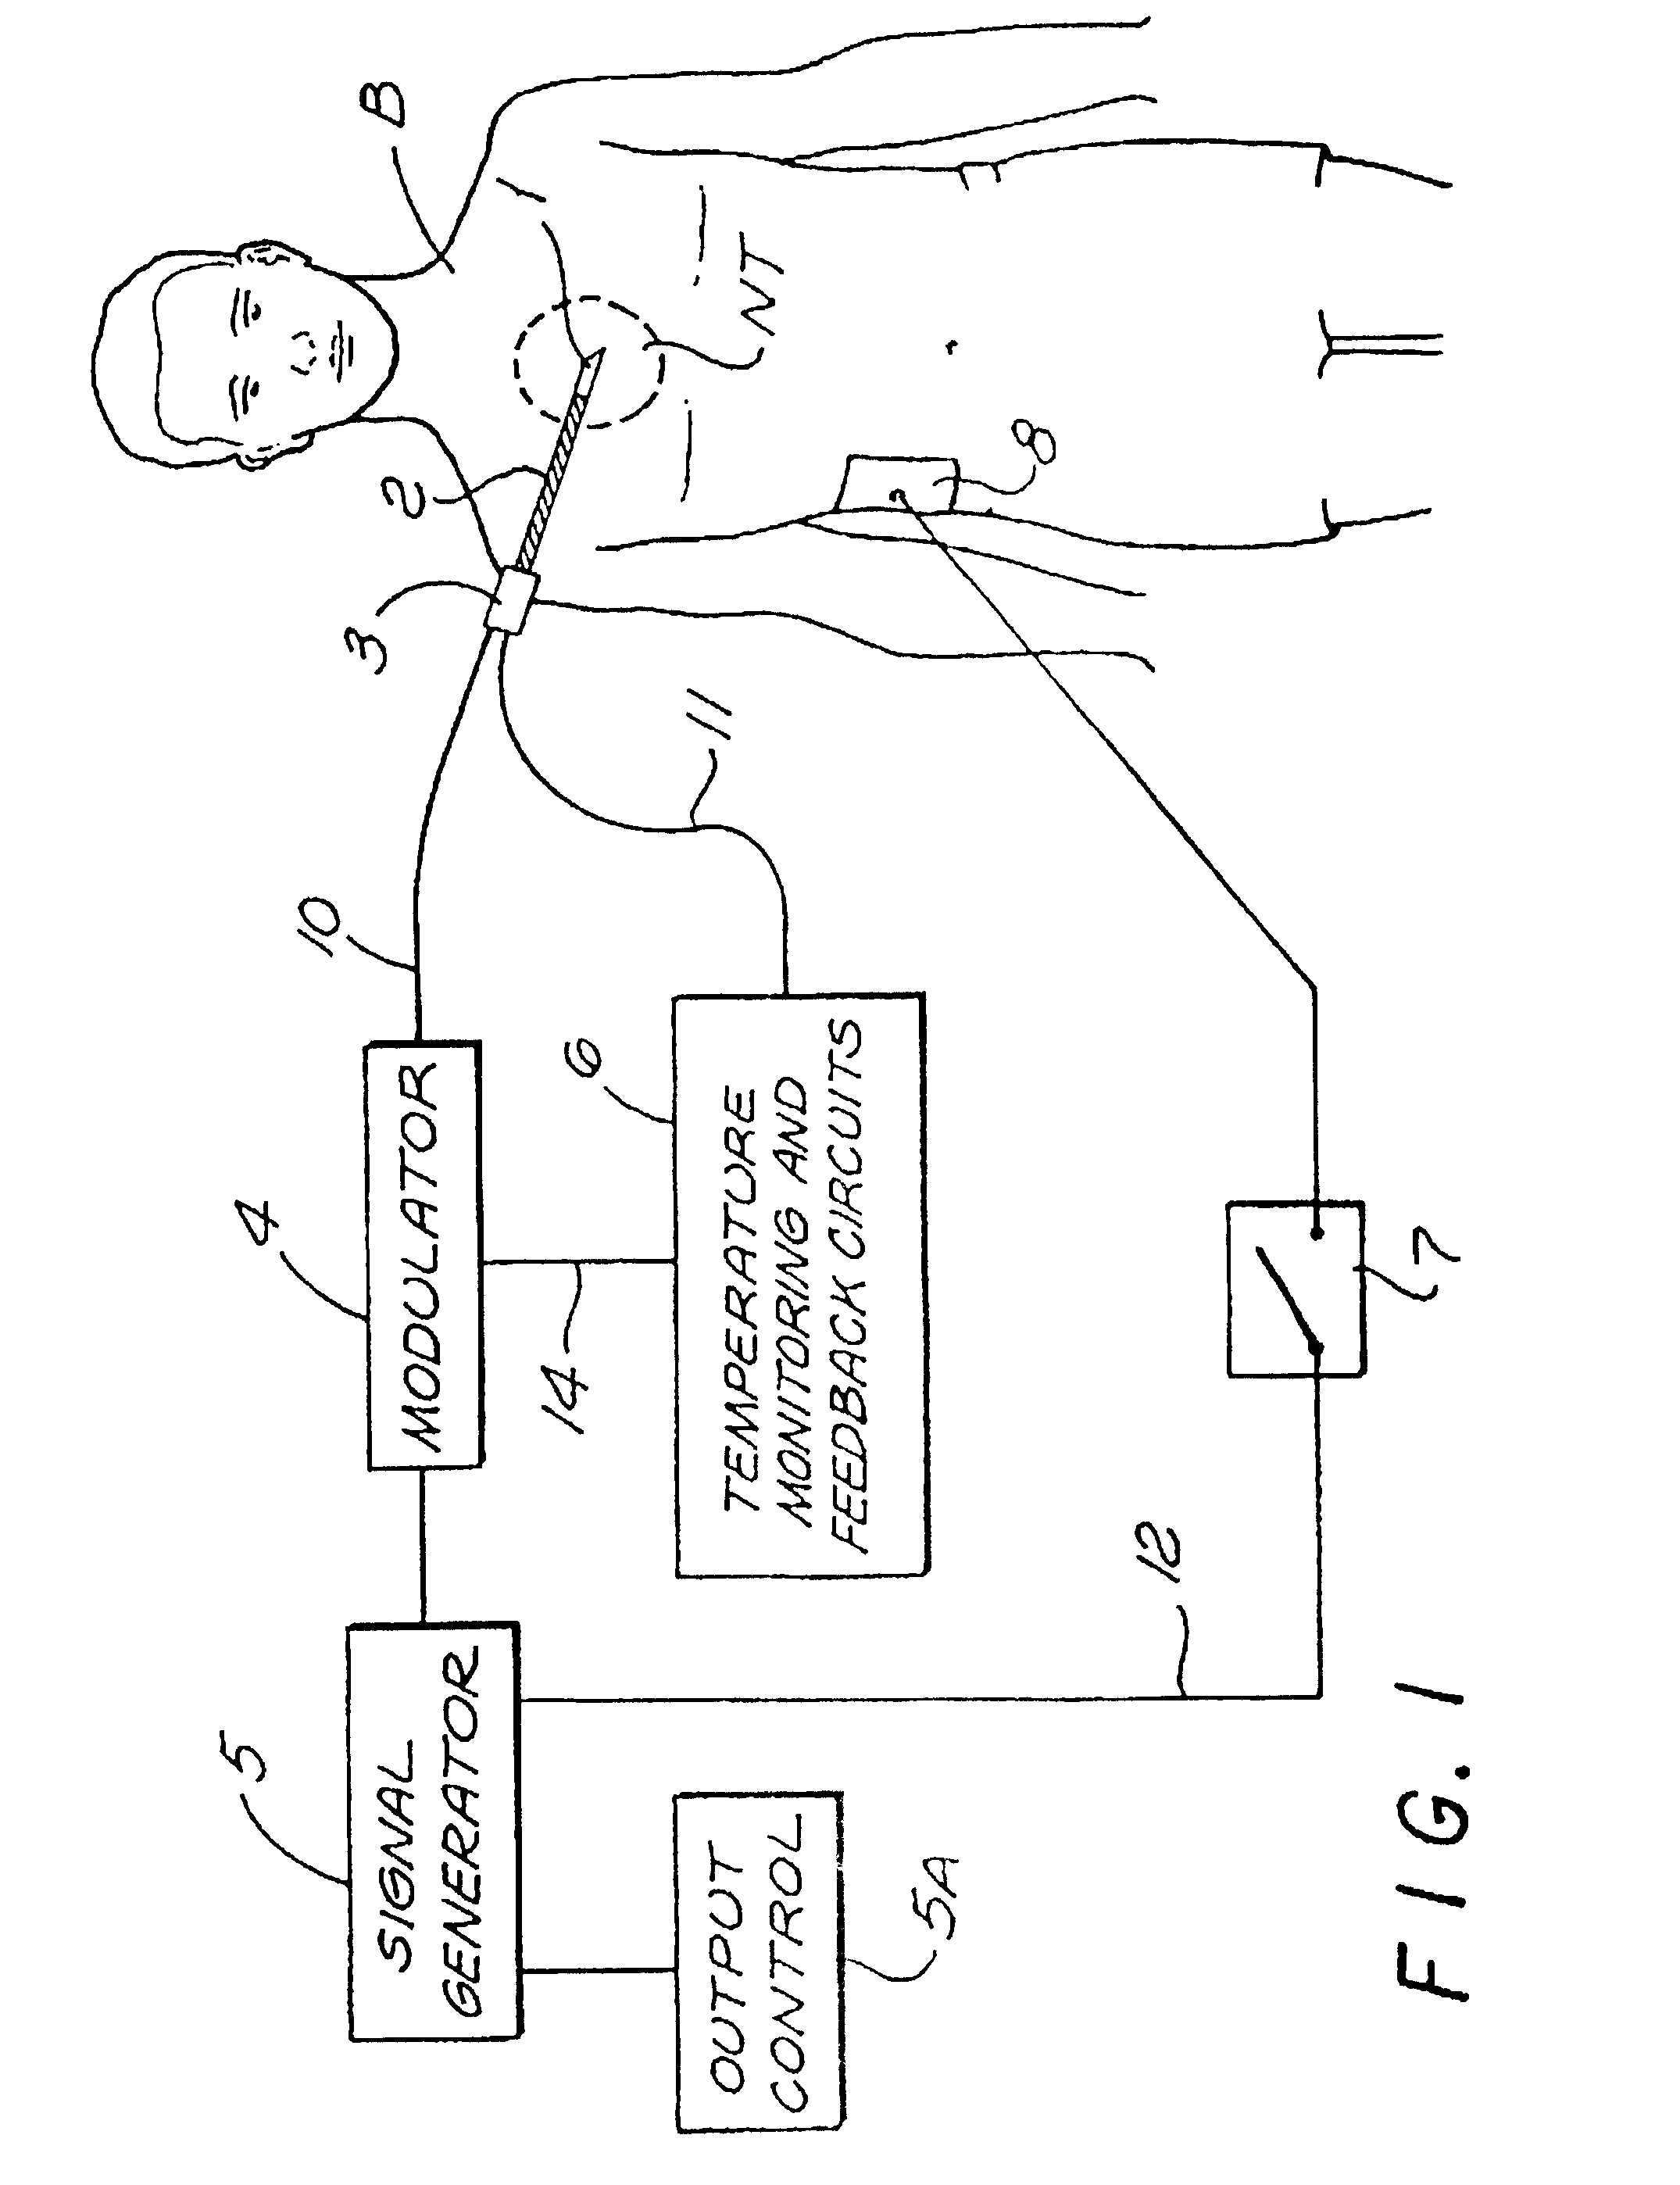 Method and system for neural tissue modification